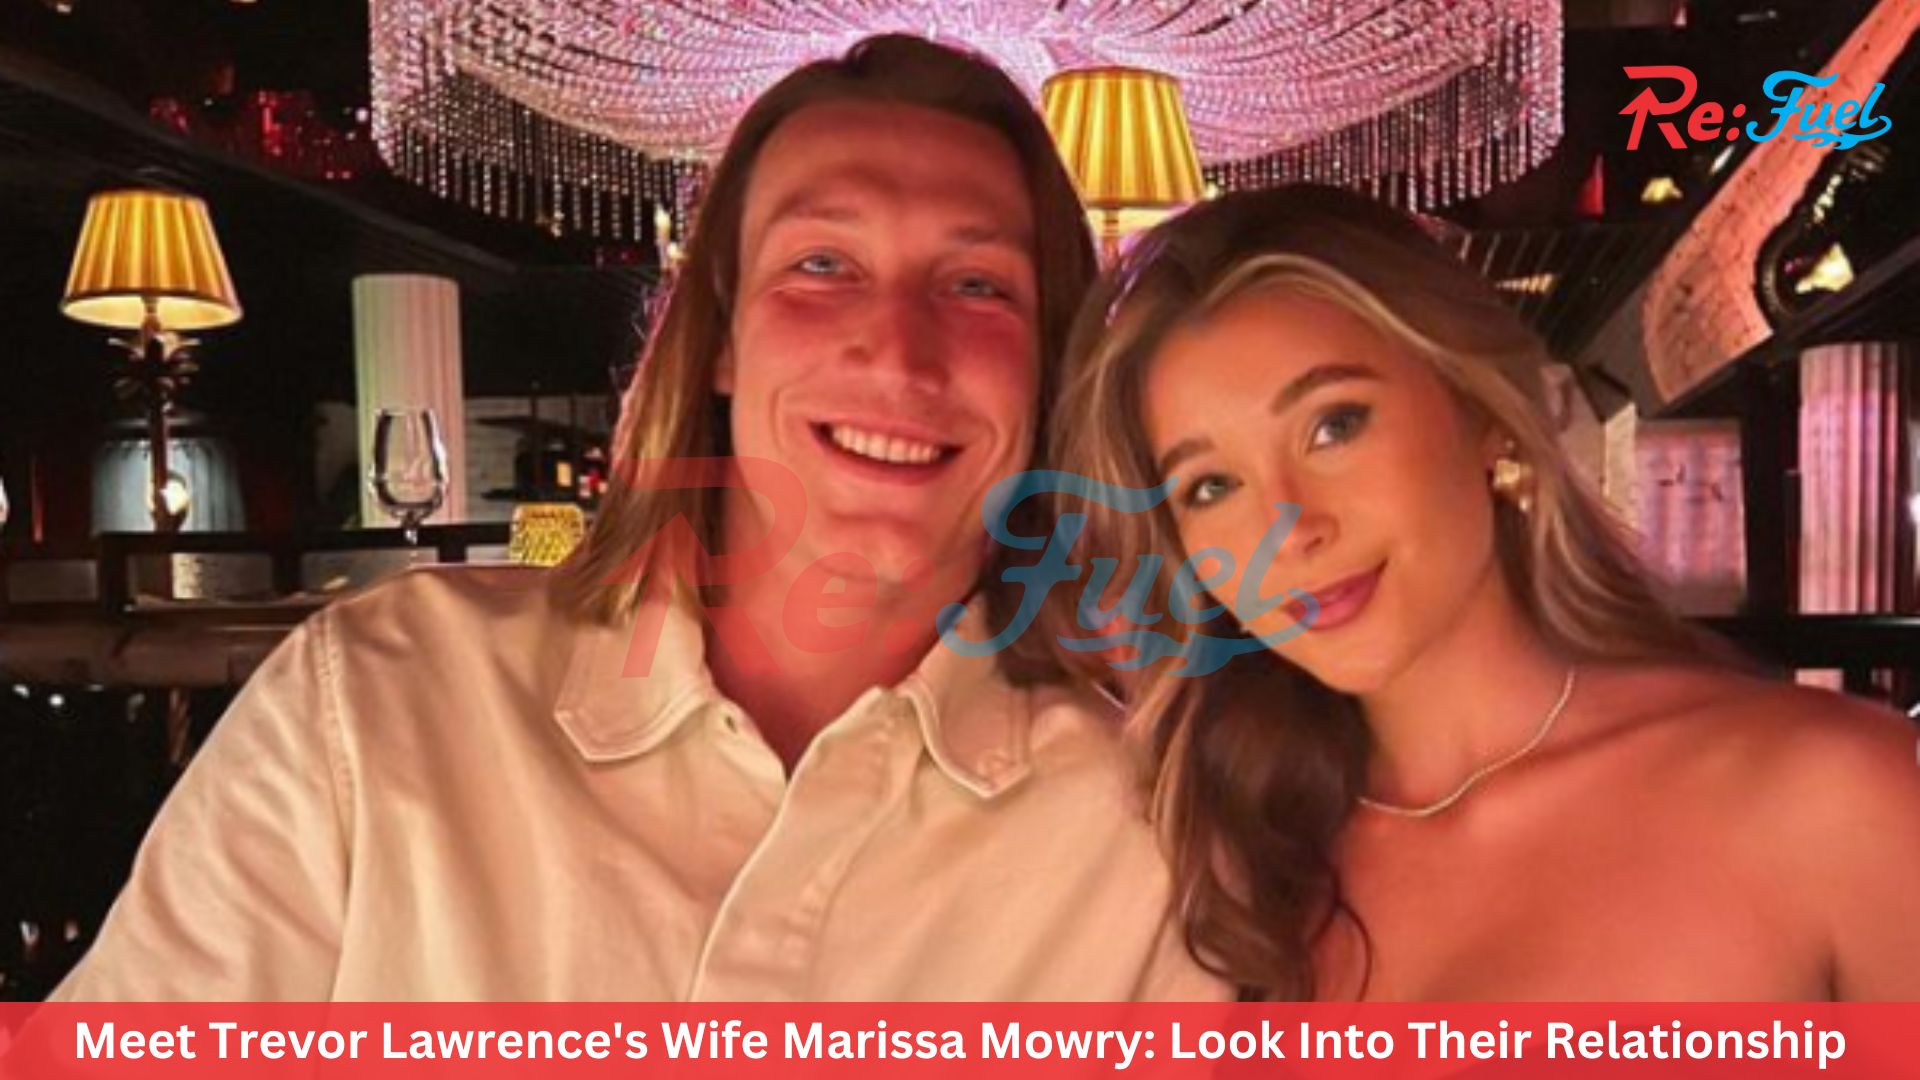 Meet Trevor Lawrence's Wife Marissa Mowry: Look Into Their Relationship